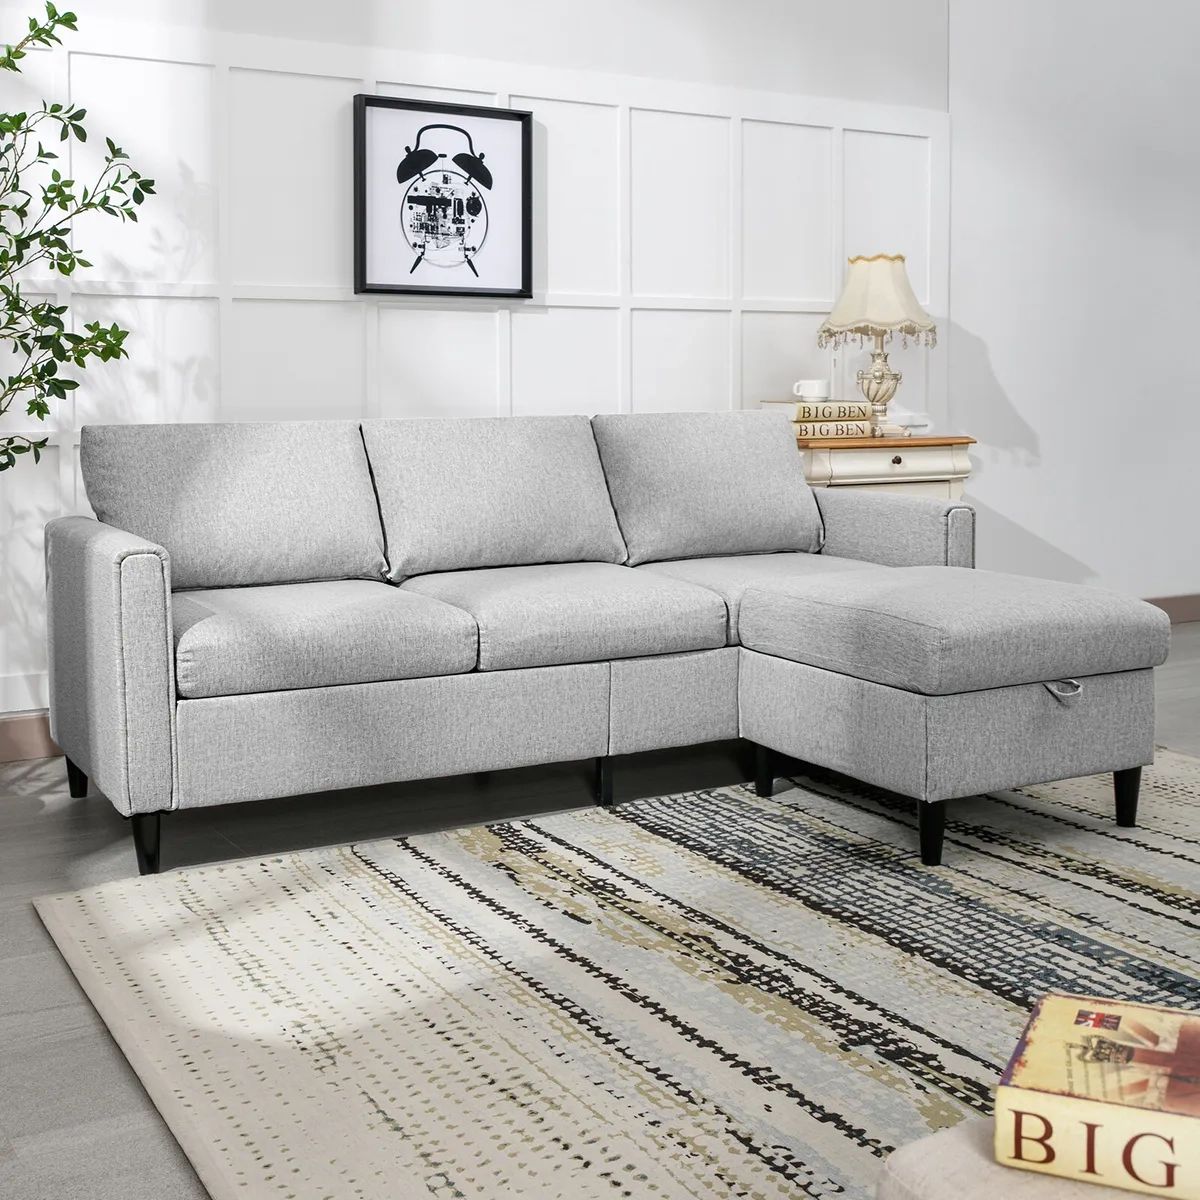 Displaying Gallery of Convertible L-shaped Sectional Sofas (View 5 of ...